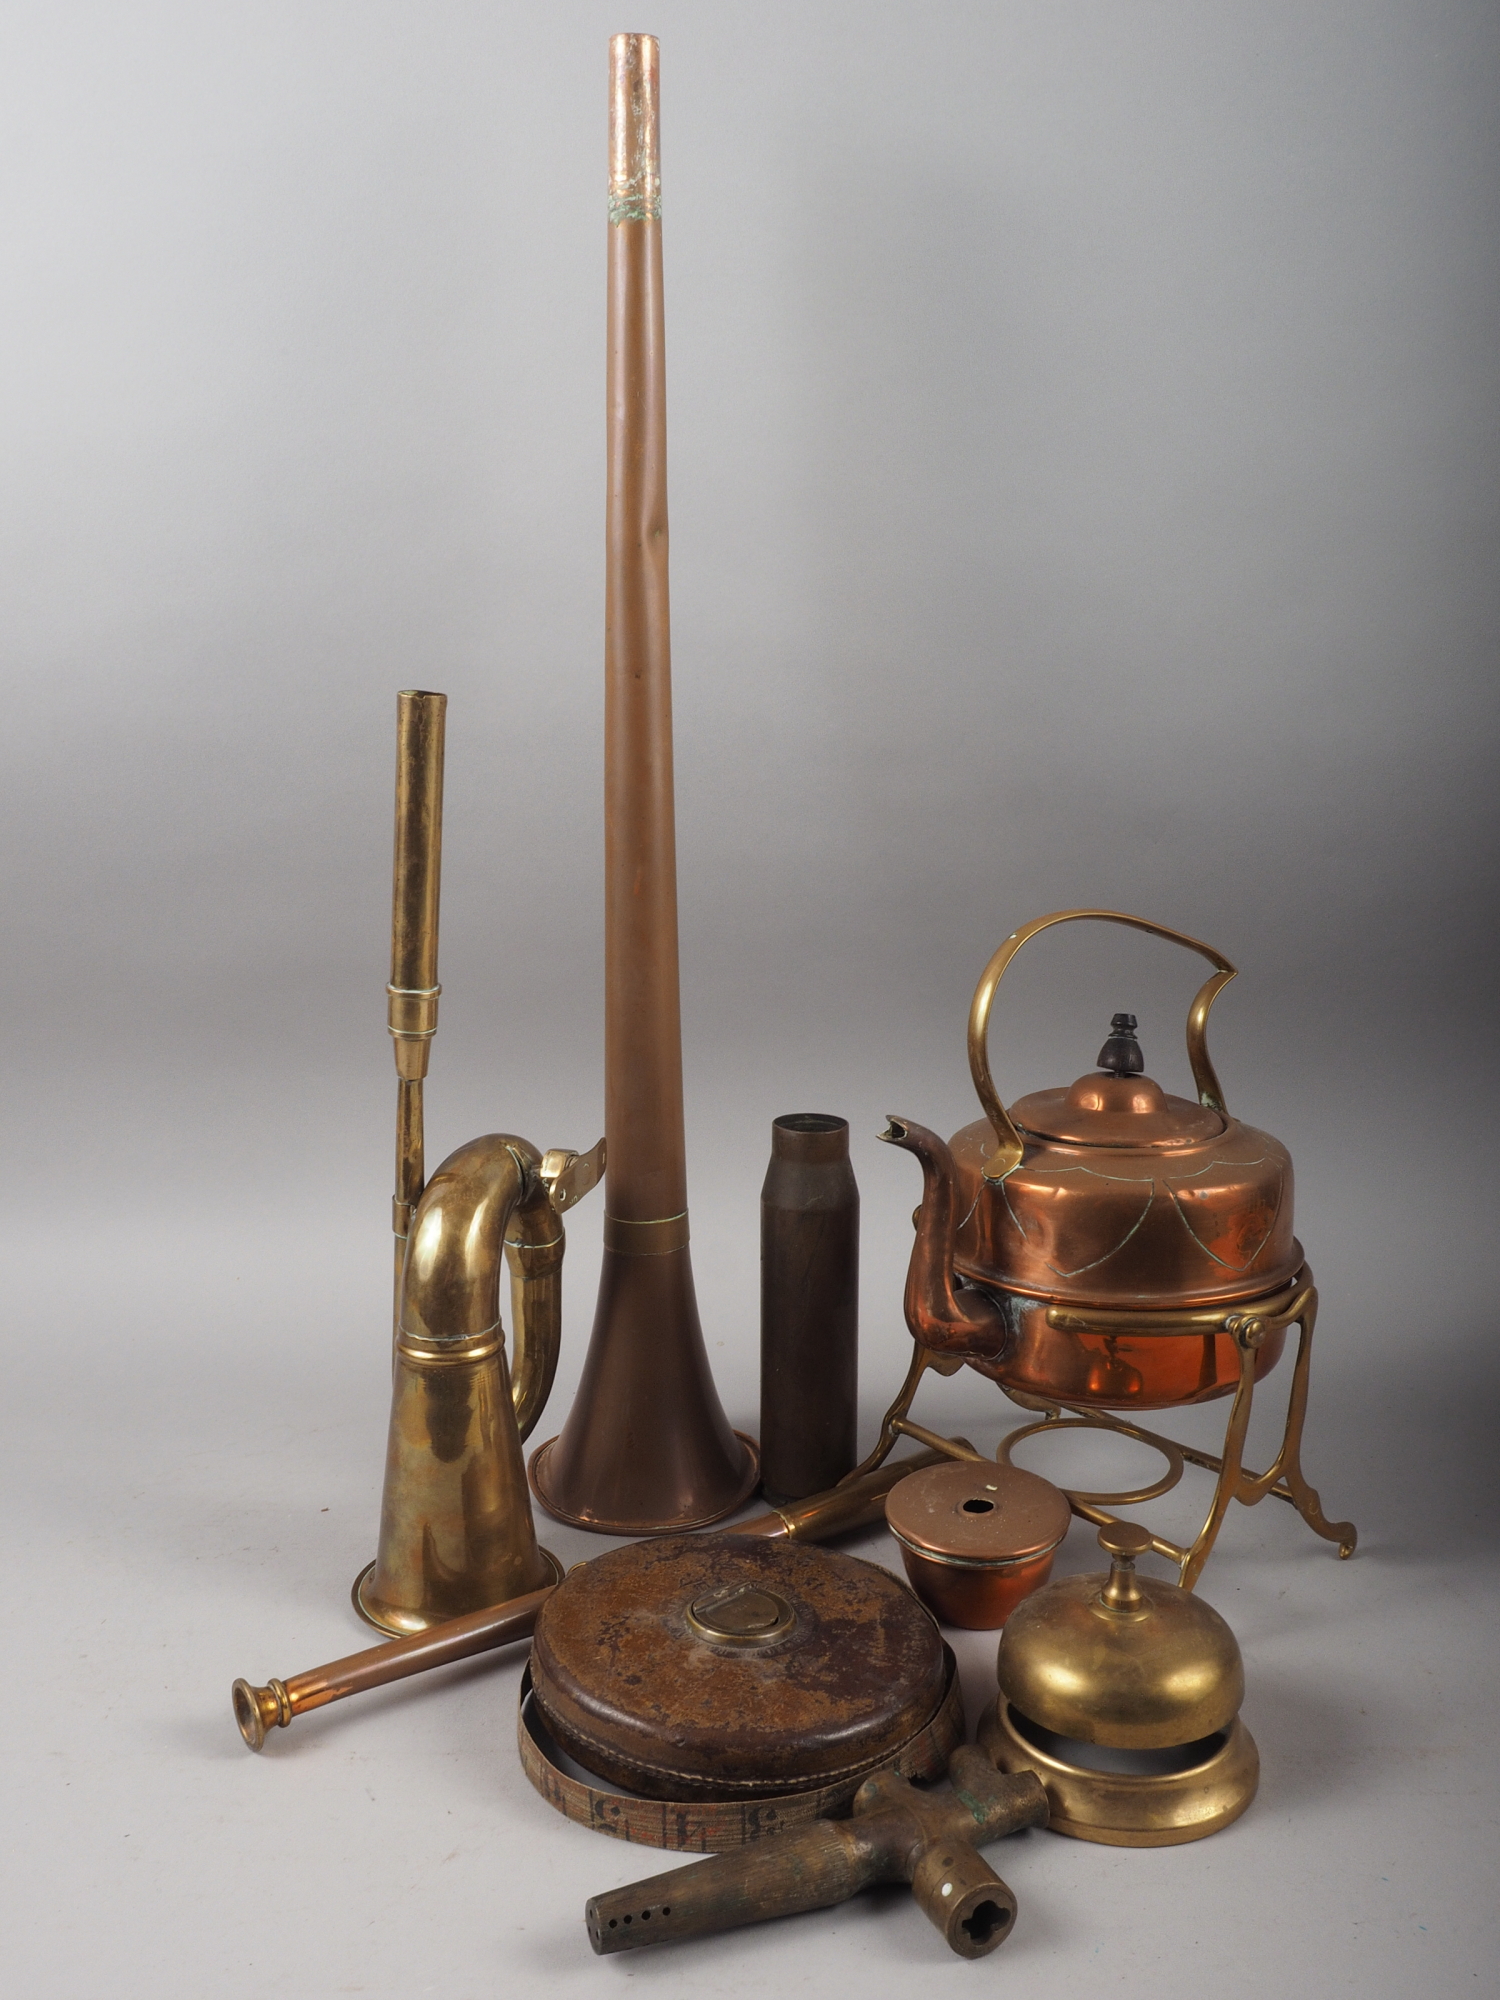 A copper kettle, on stand, a posting horn, 33 3/4" long, a beer tap and other items